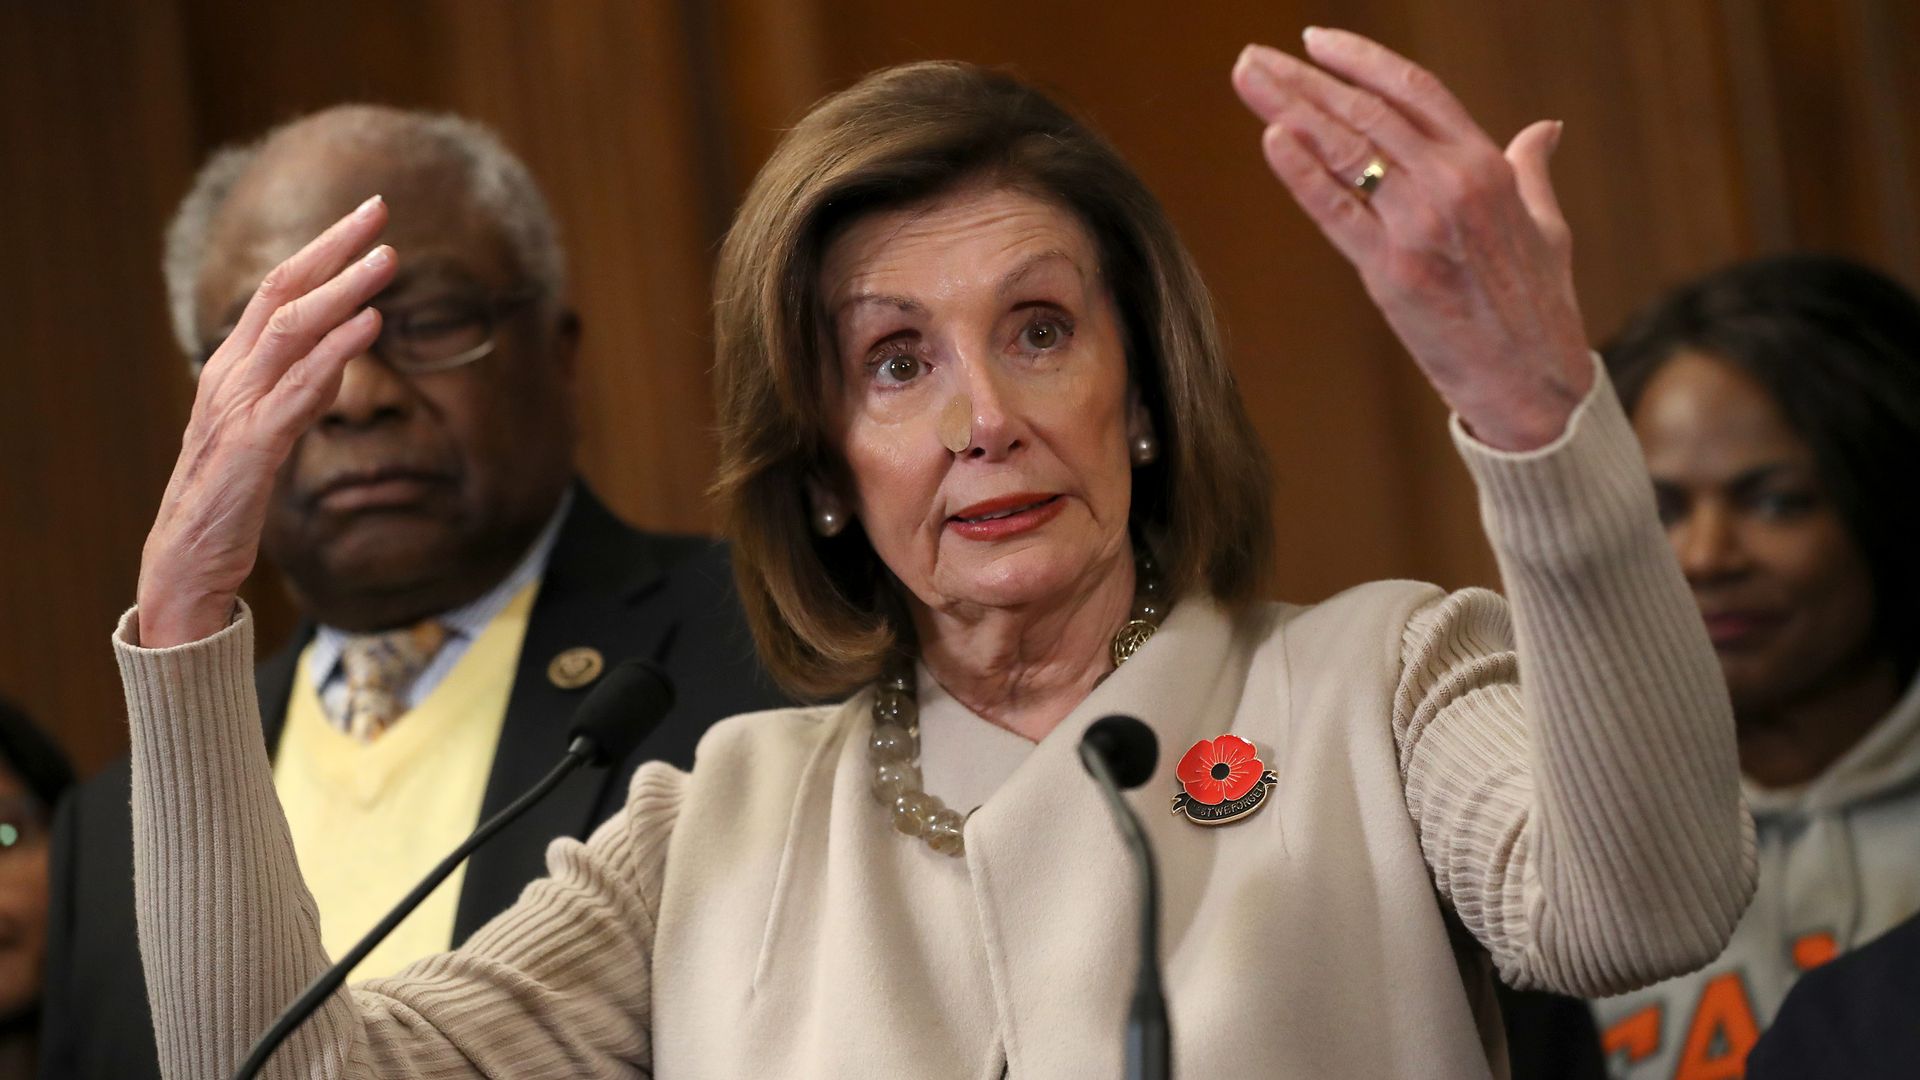 In this image, Pelosi stands with her arms above her head.